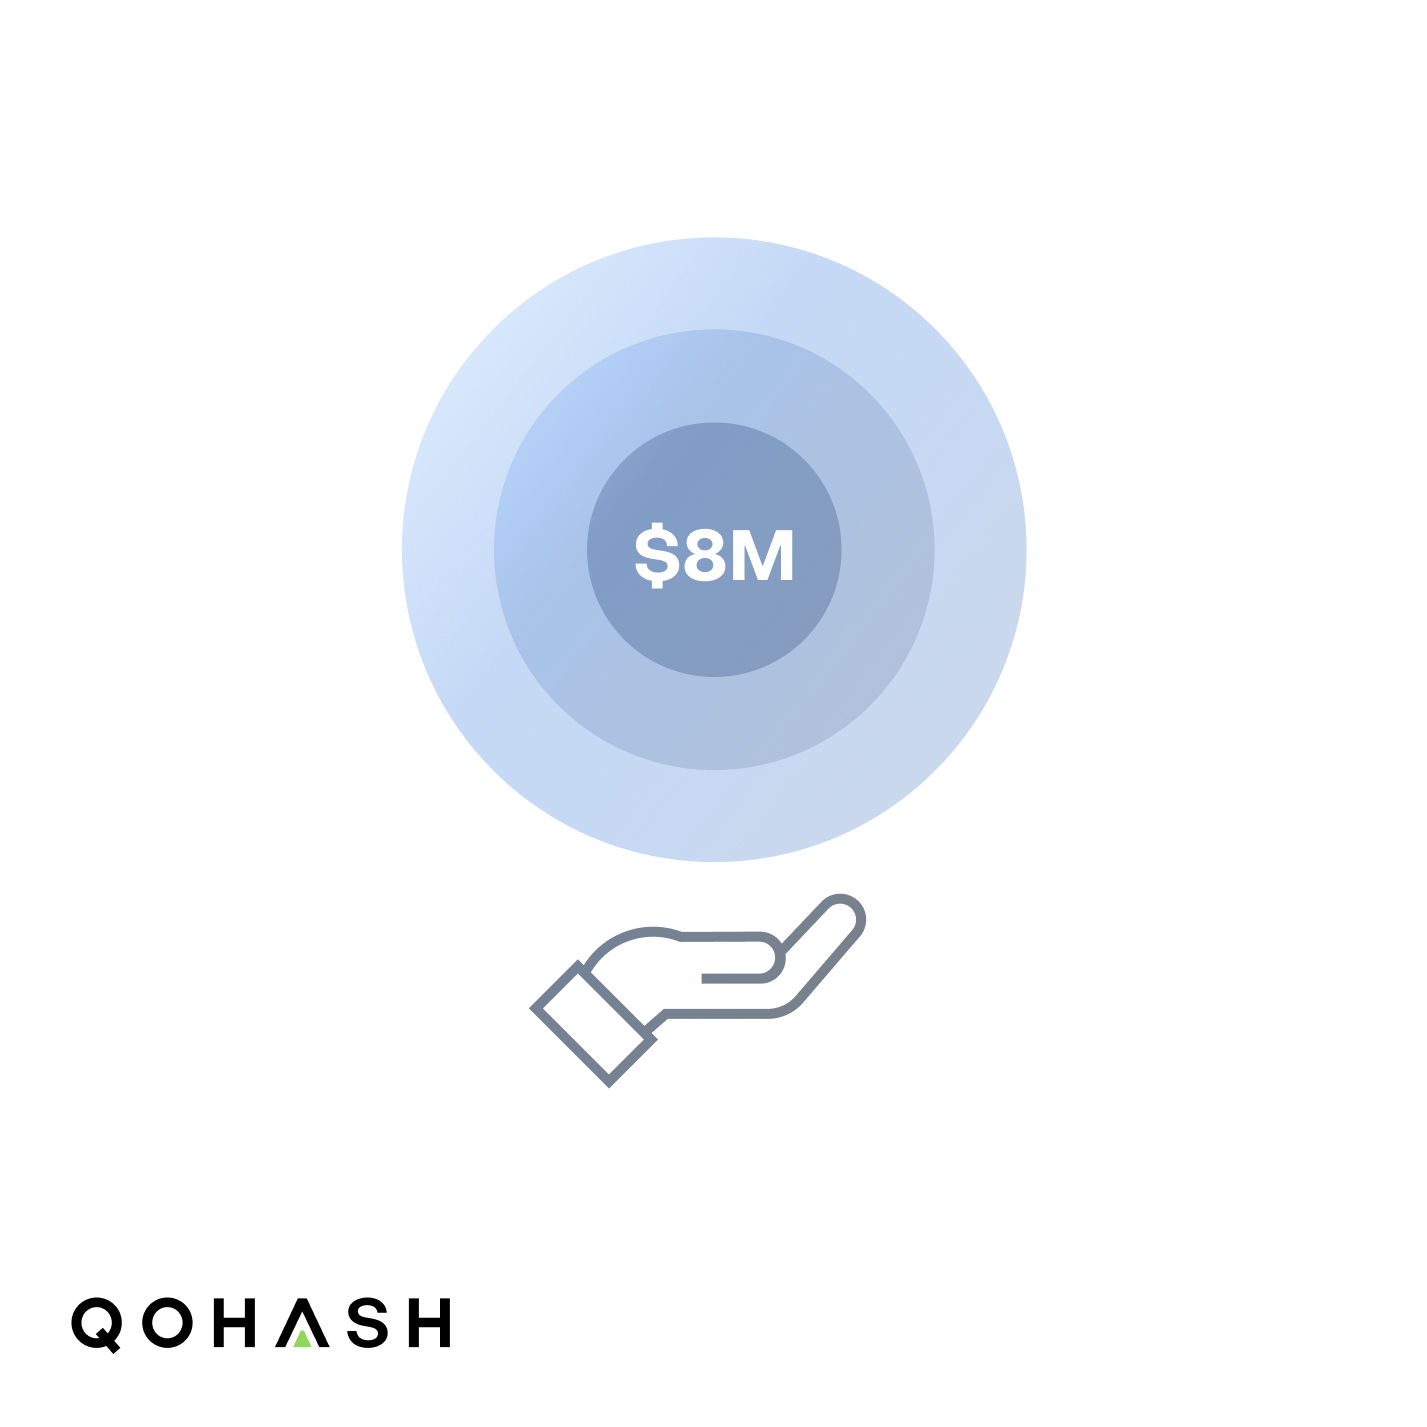 Qohash Secures $8M in Funding With Cutting-Edge Data Security Solutions Helping Companies Stop Global Increase in Data Breaches